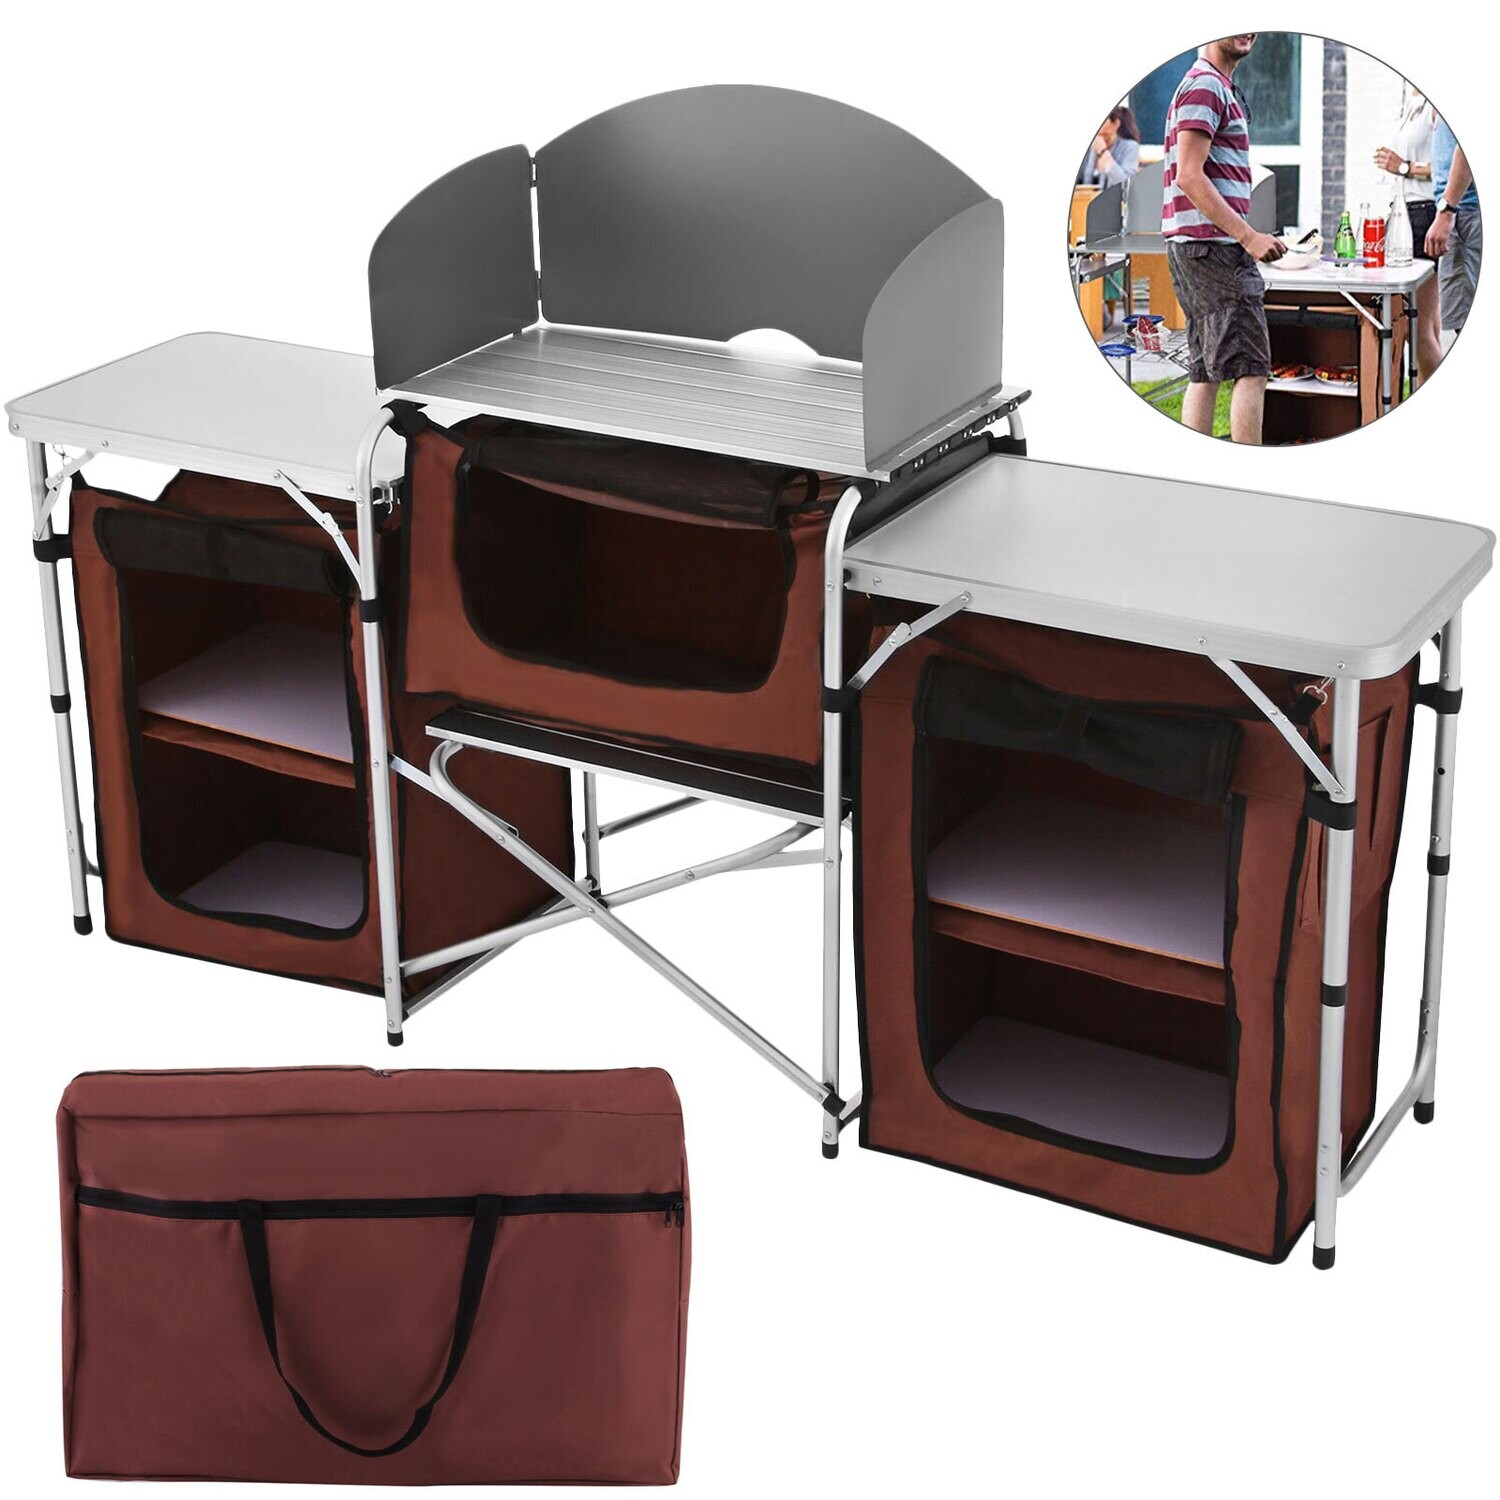 Outdoor Camping Kitchen Folding Camping Kitchen Portable Camping